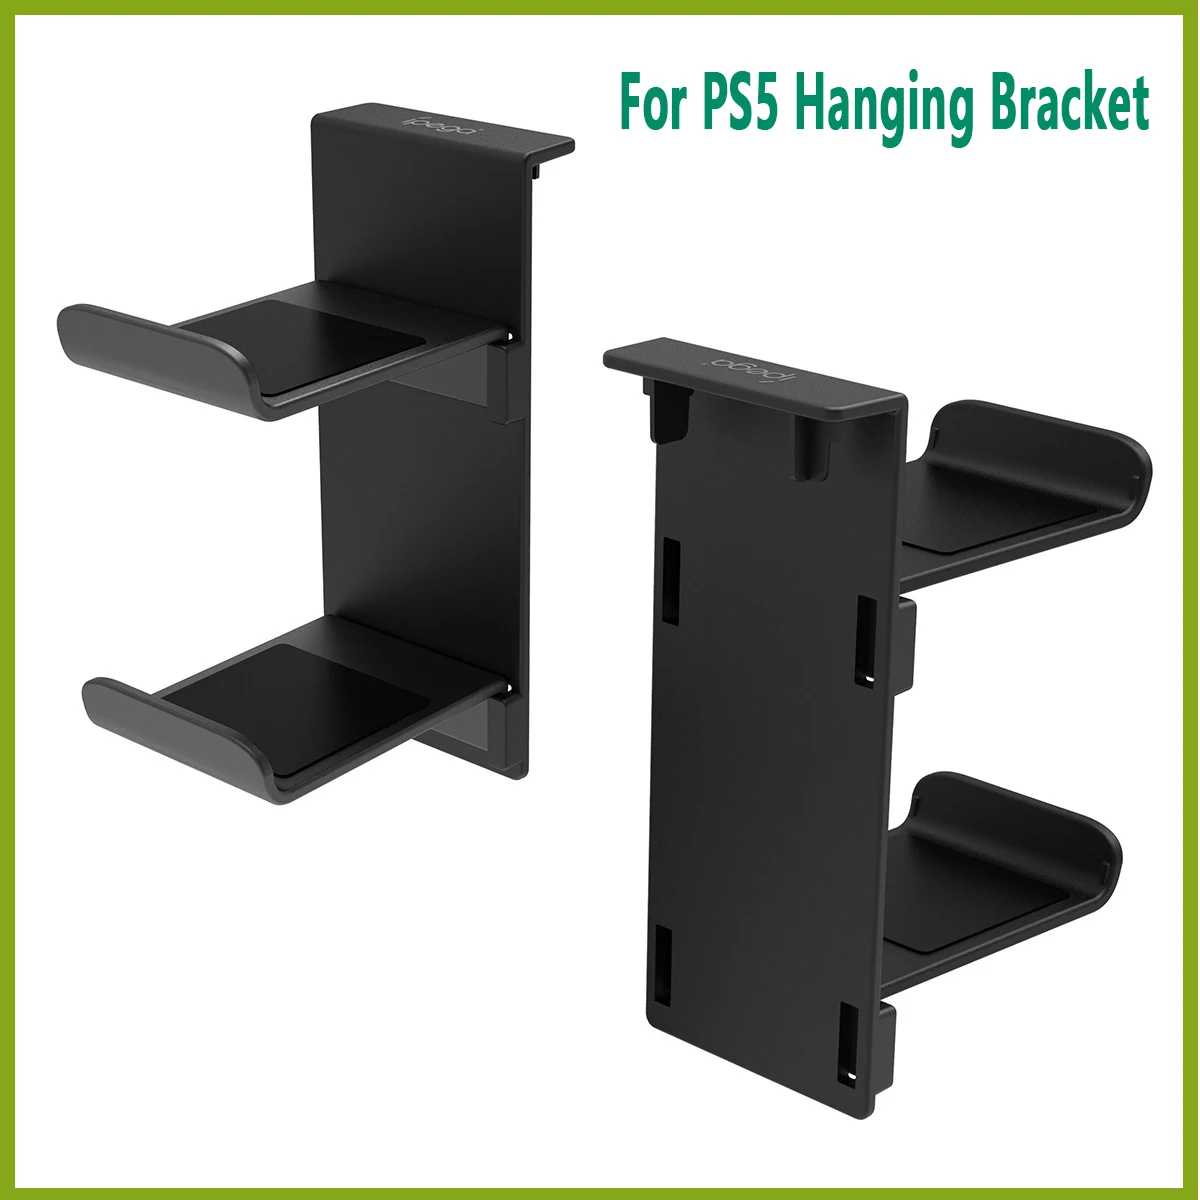 For PS5 hanging bracket for PS5 game handle headphone mount XSX handle side mount headphone mount Storage bracket